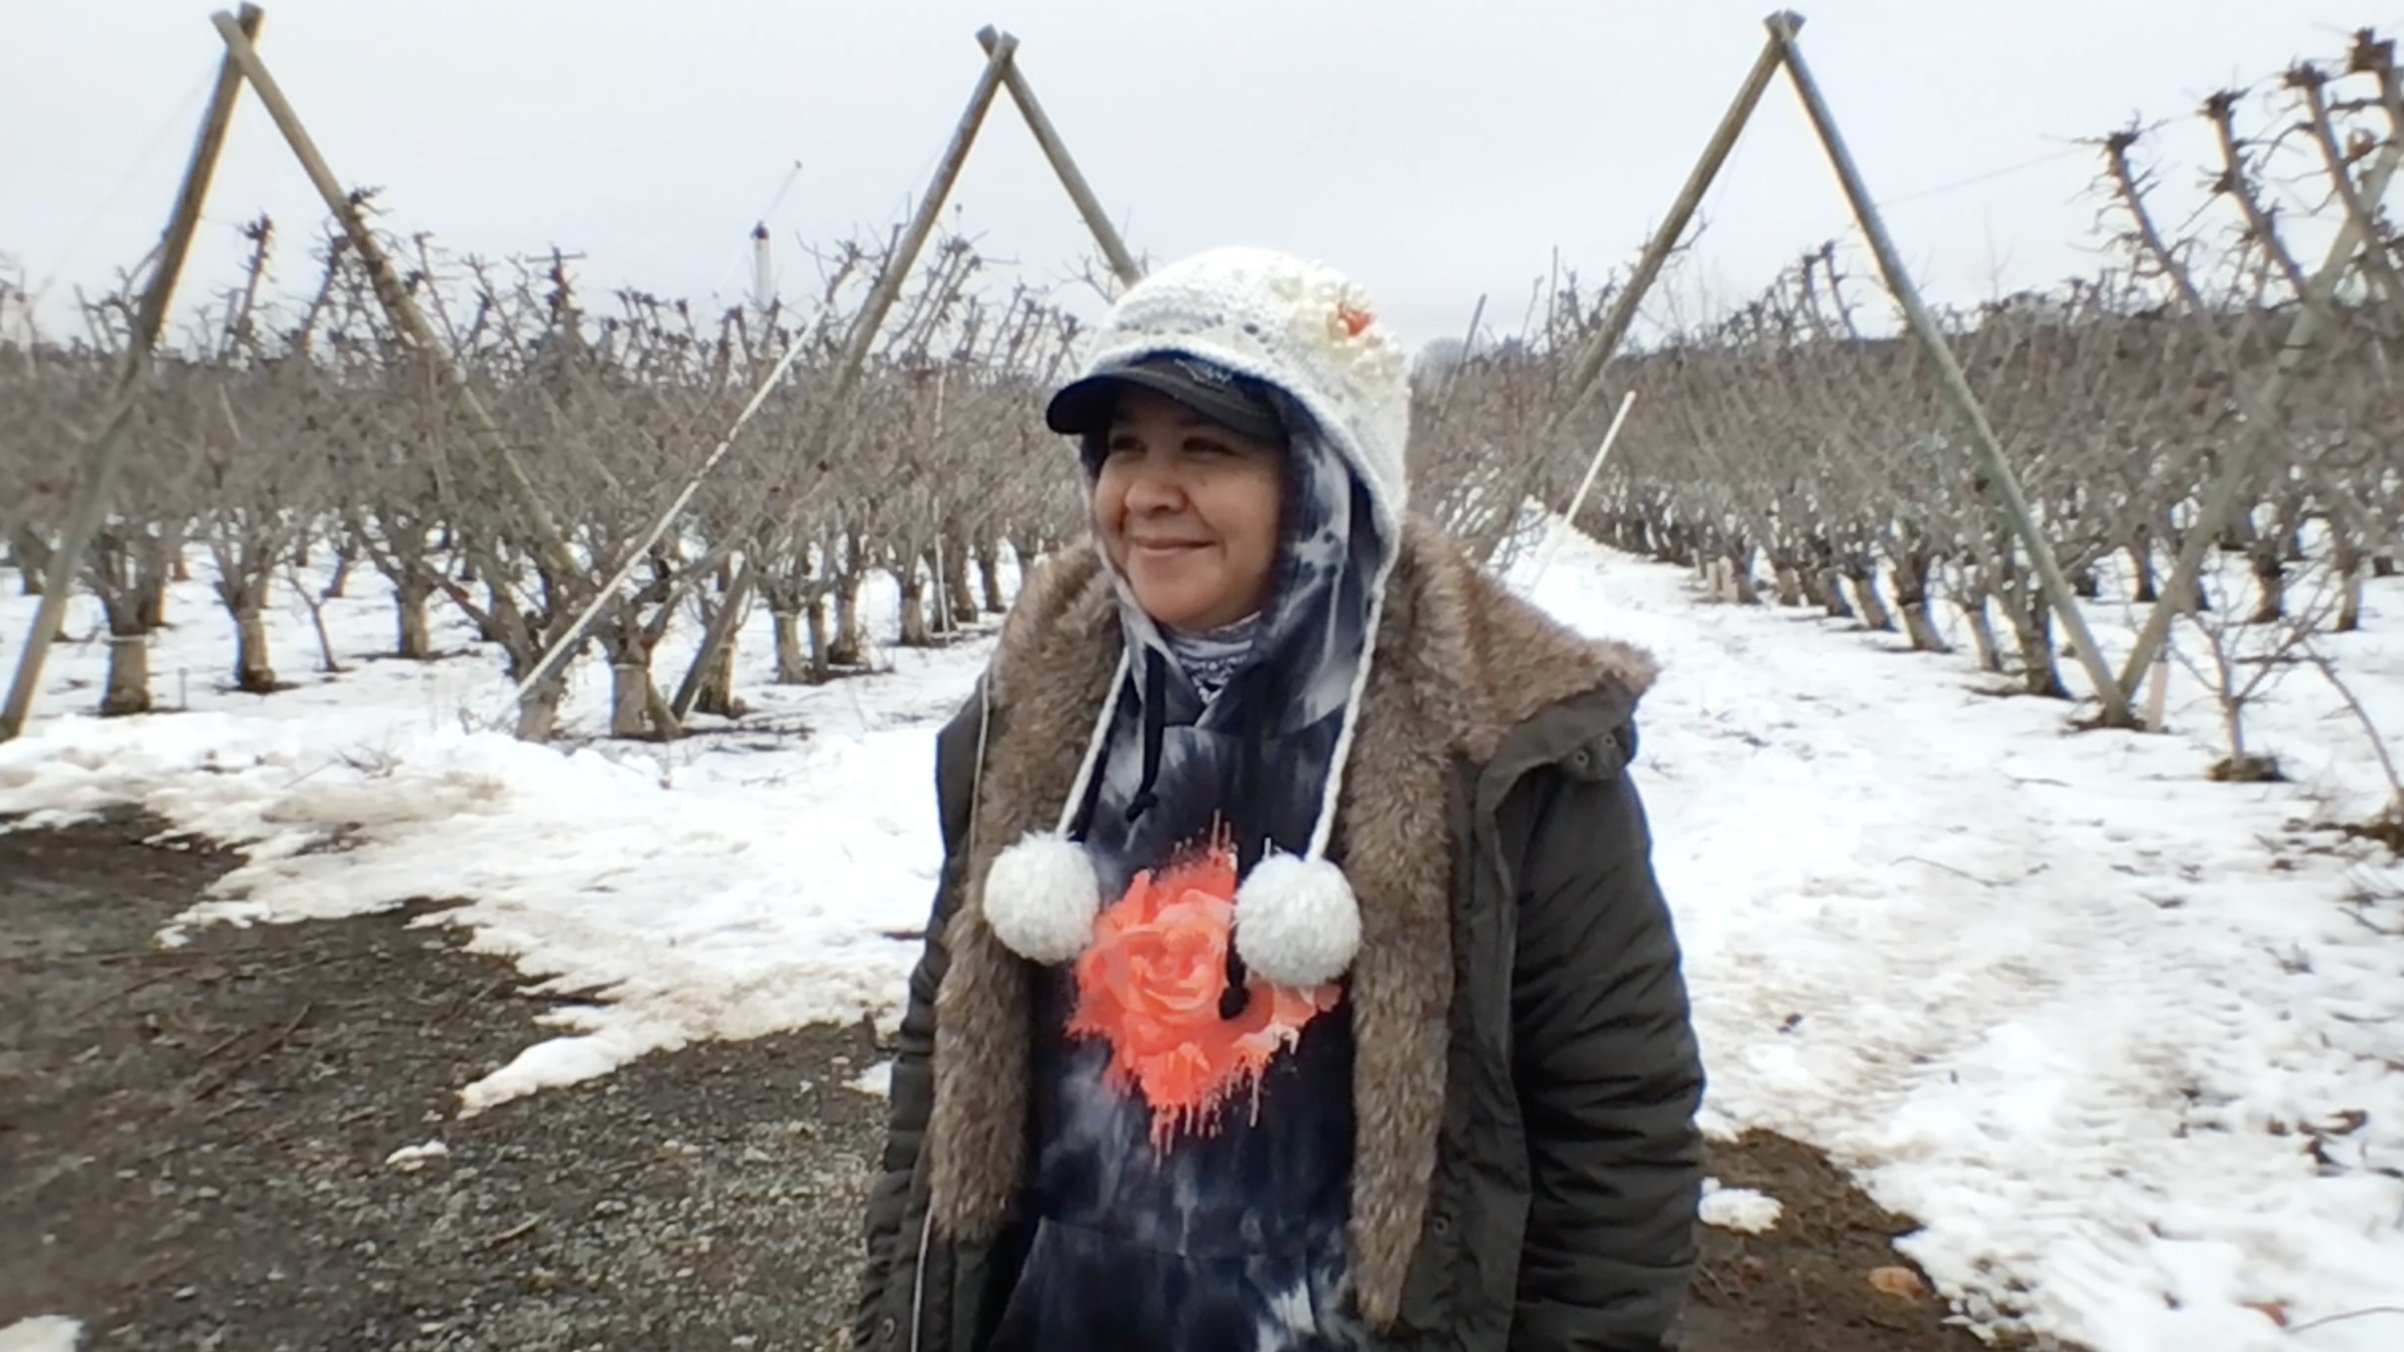 Aurora Vega from NWFM, standing in an apple orchard during winter for an interview with Ganaz.